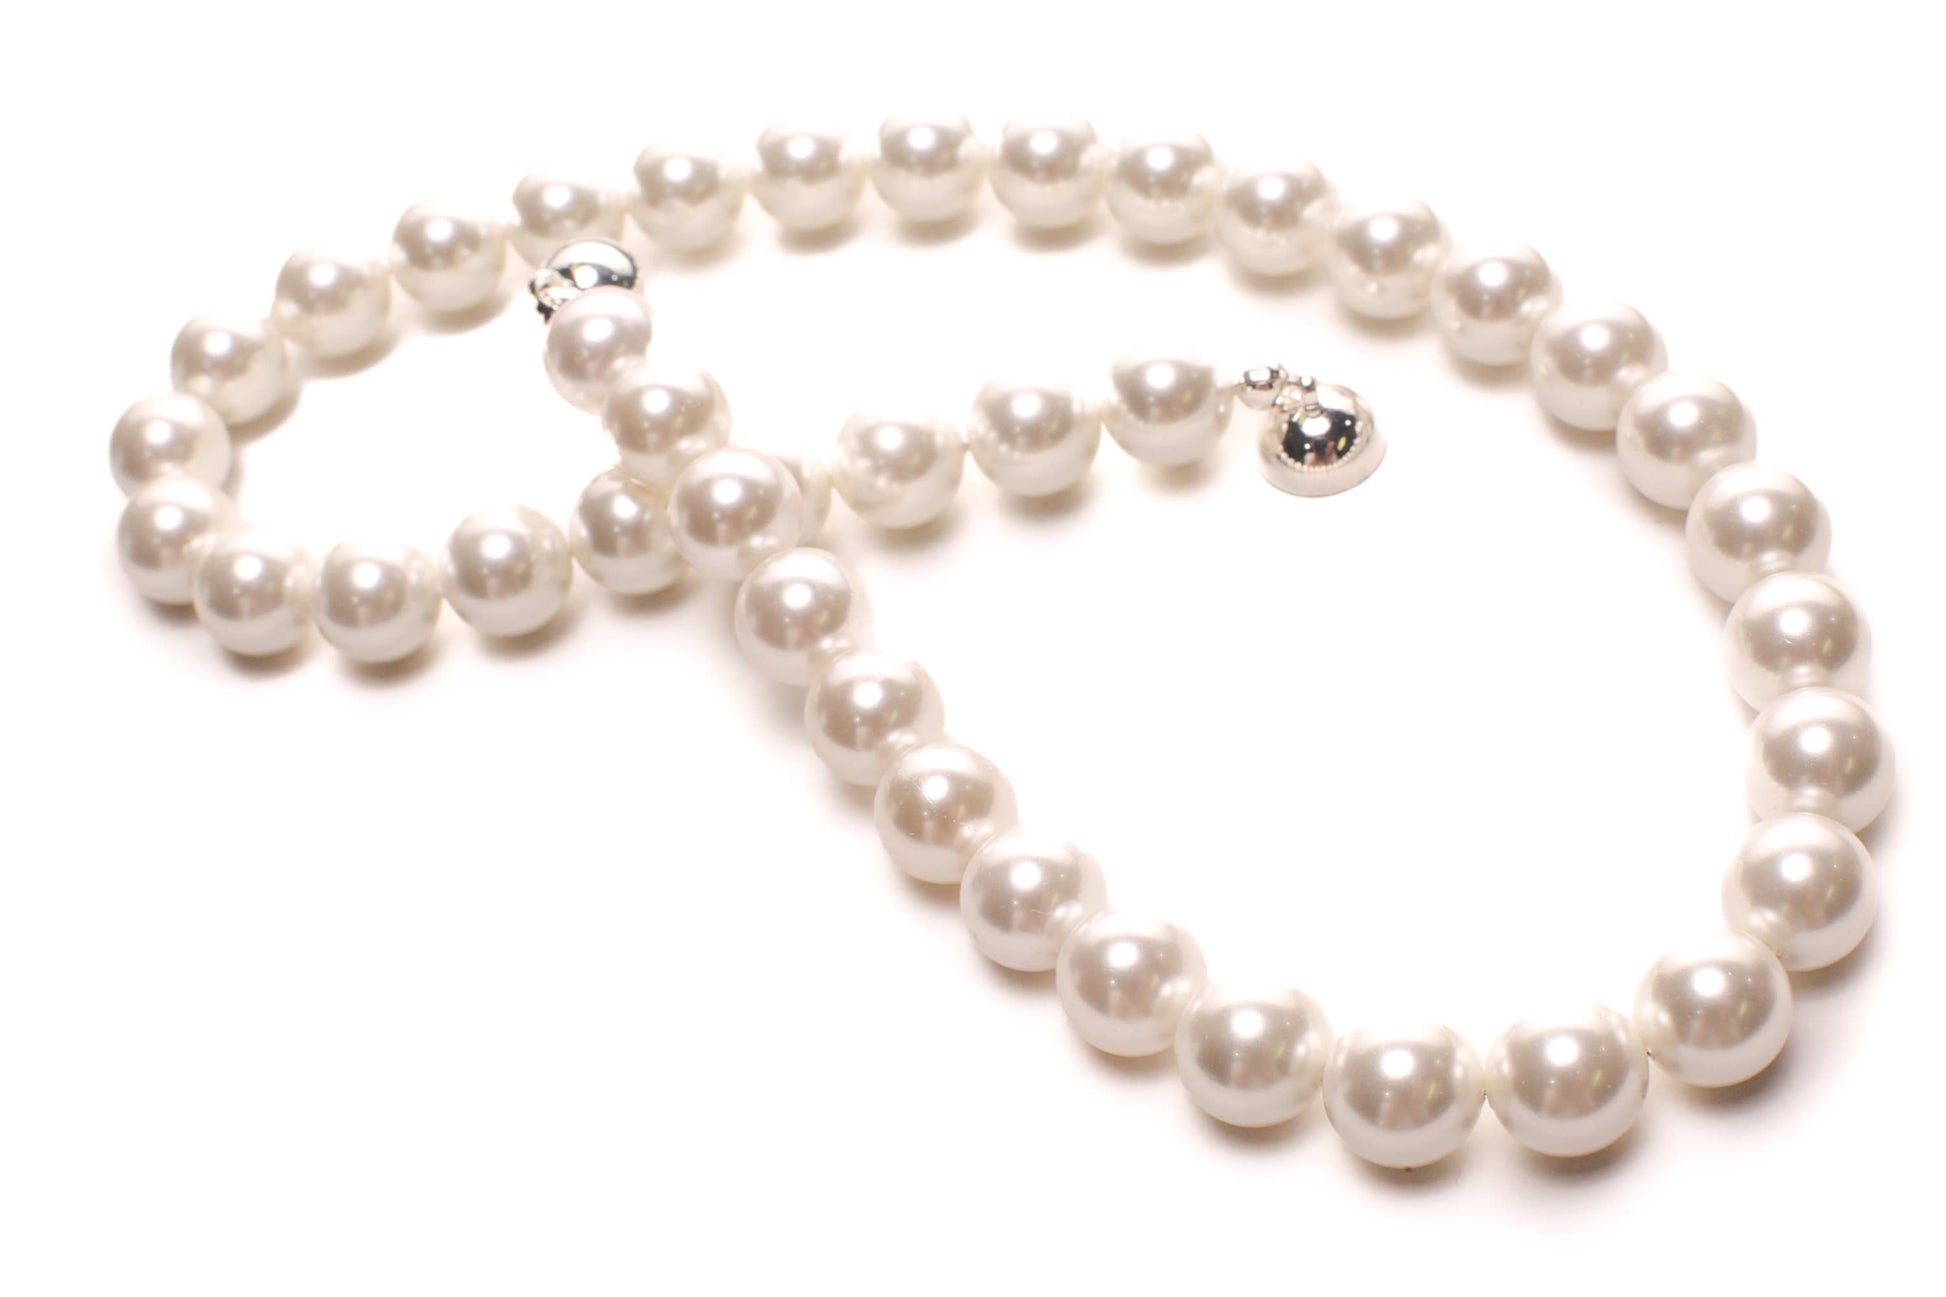 12mm White South Seashell Pearl Necklace with Magnetic Clasp Bridal ,Evening wear , party , Elegant gift